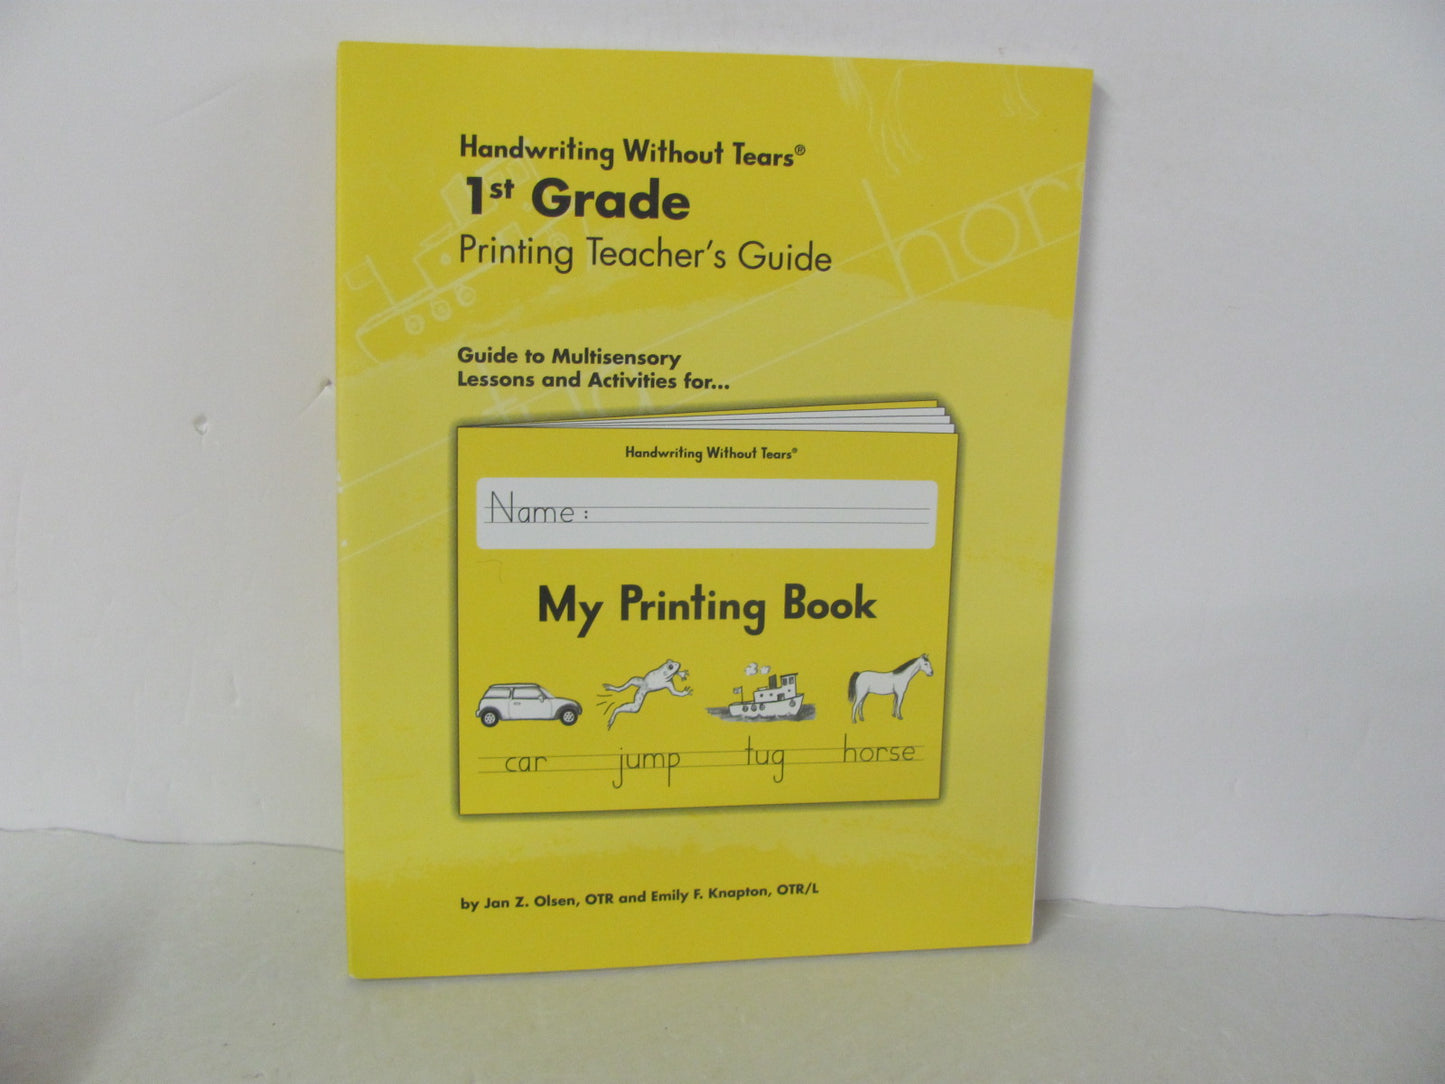 Printing Handwriting Without Tears Teacher Guide Pre-Owned